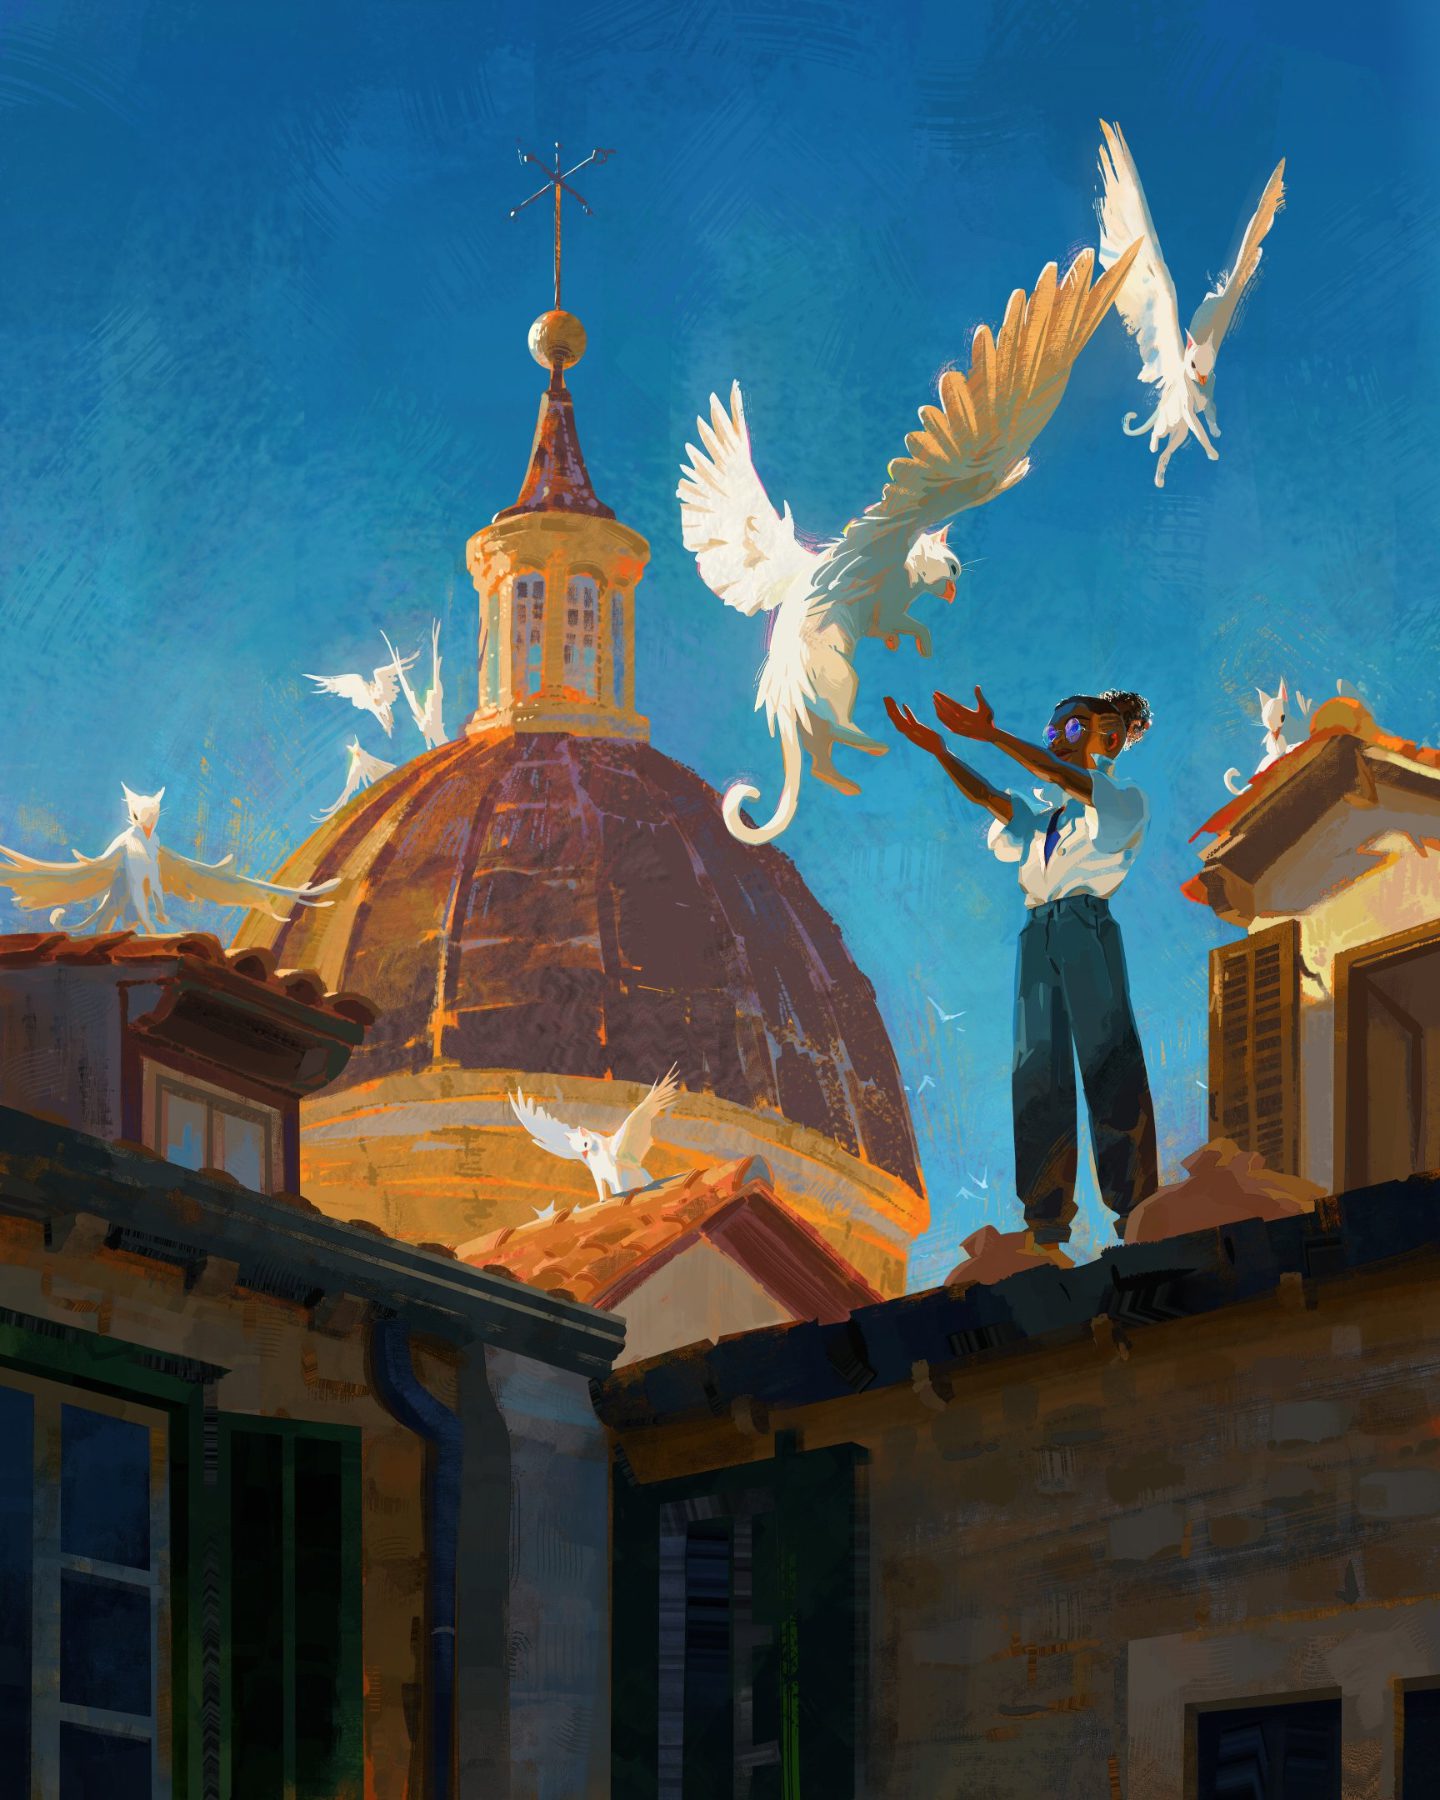 A girl feeds gryphons on the roof of a building